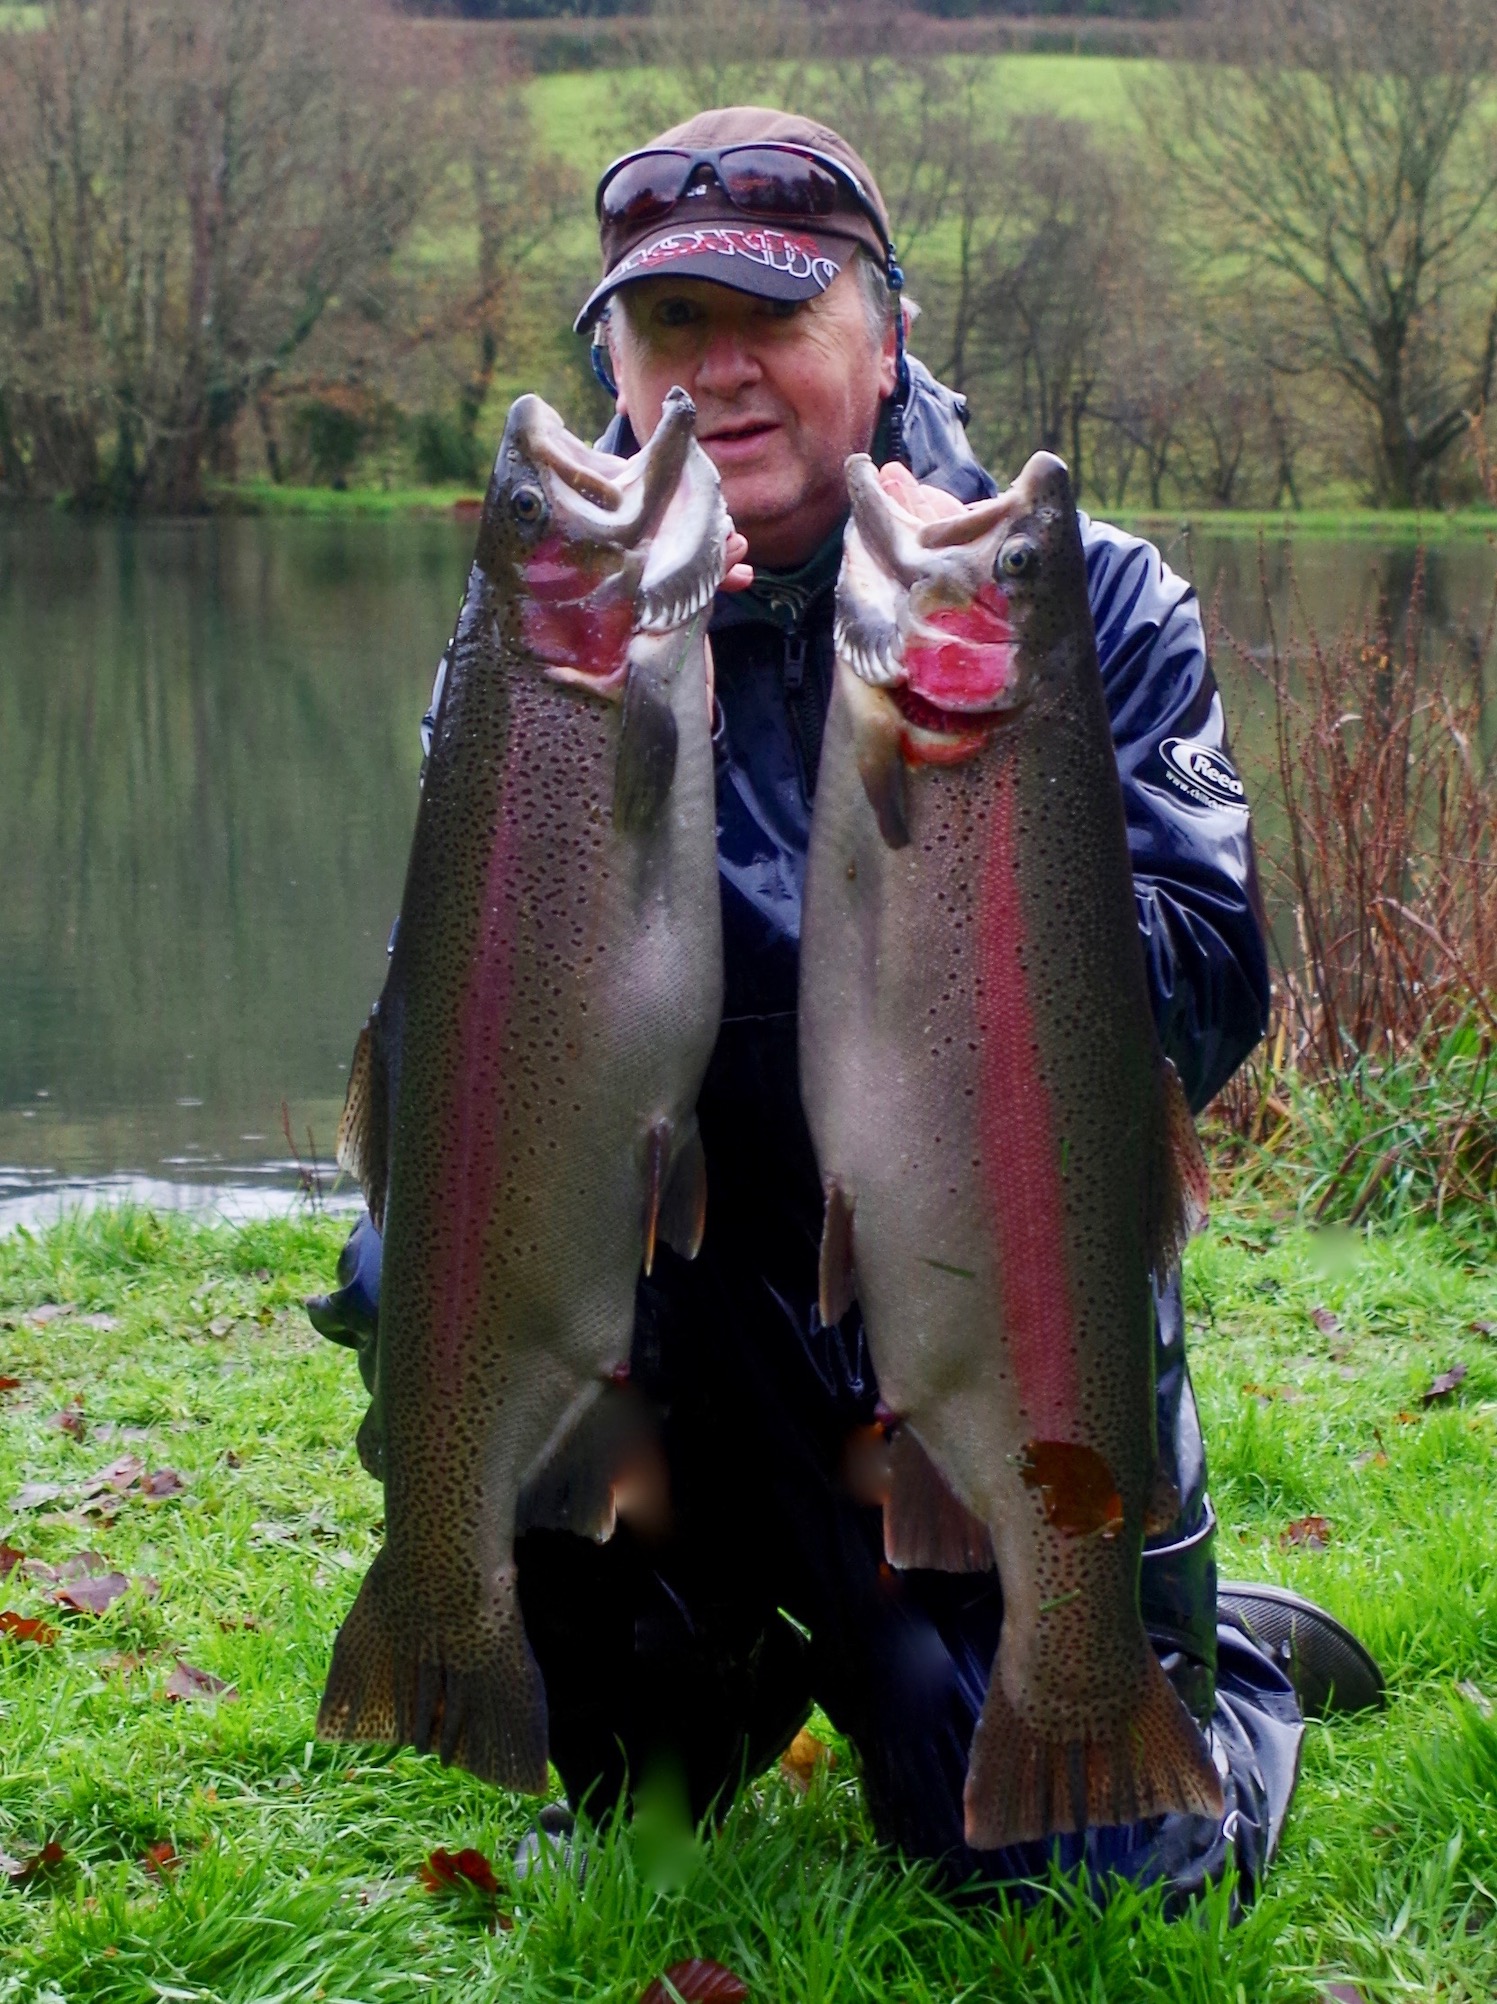 BLAKEWELL FISHERY - North Devon & Exmoor Angling News - The latest